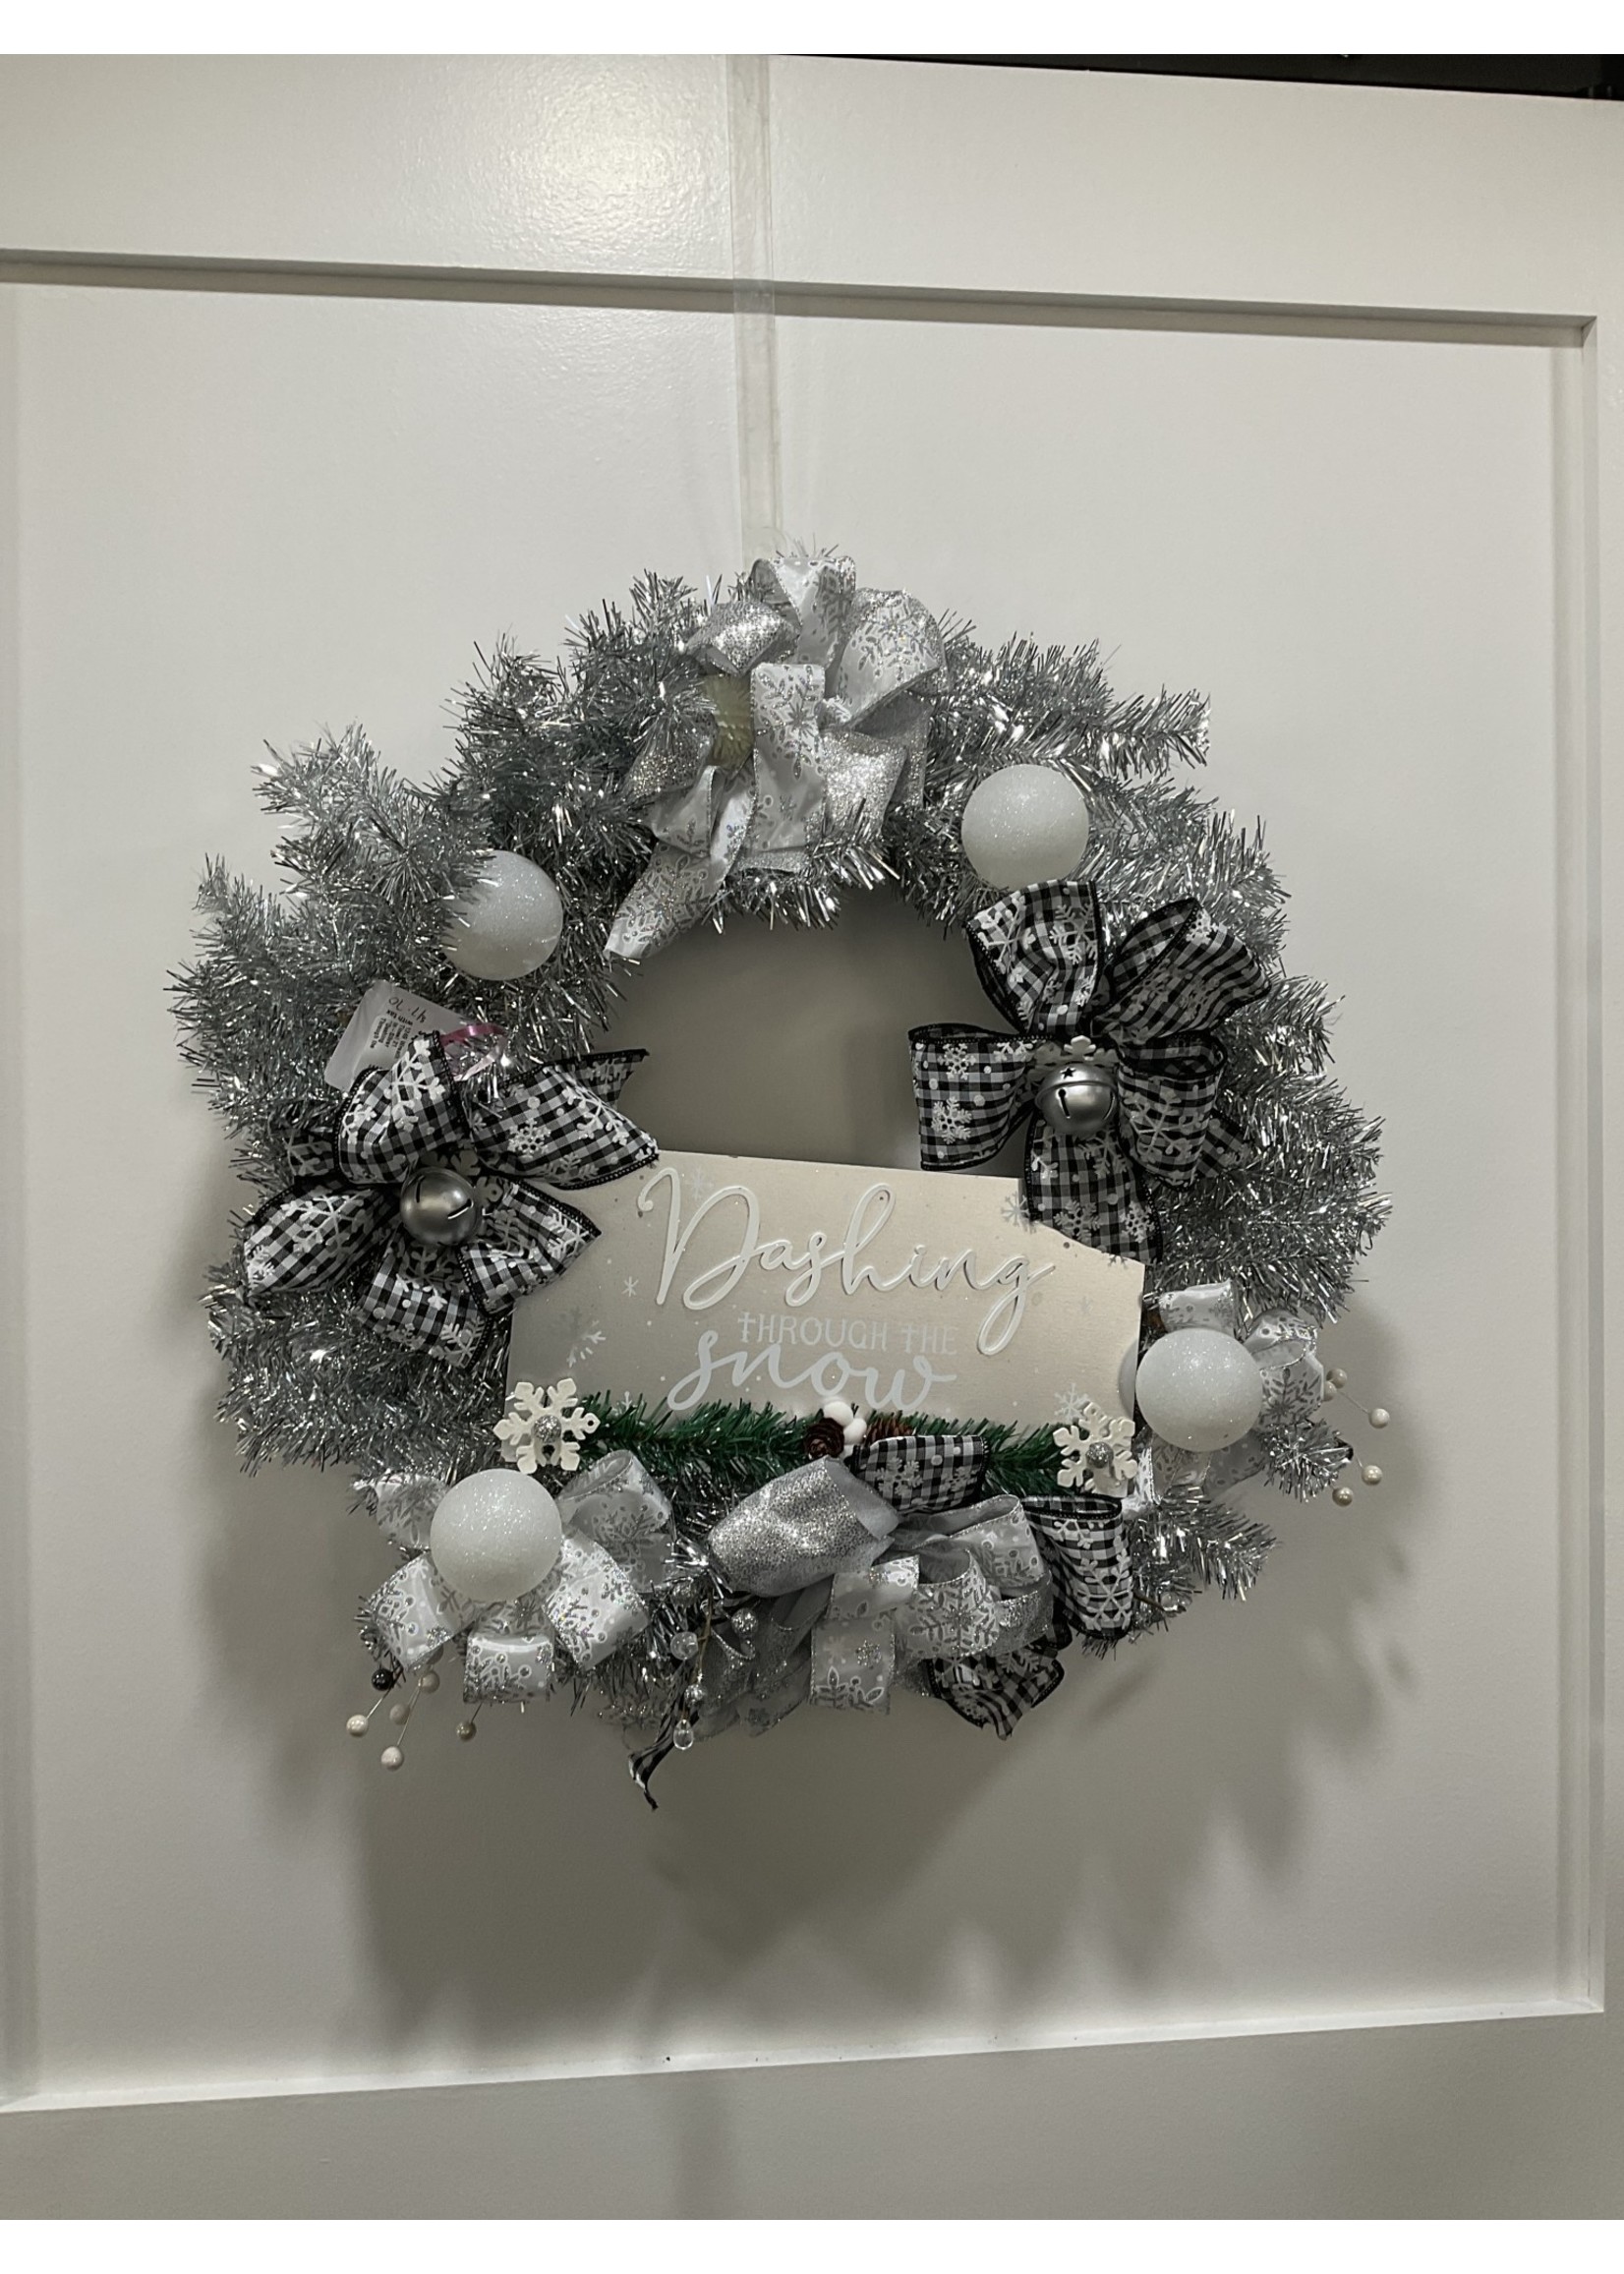 My New Favorite Thing Wreath Tinsel 21 in-Silver "Dashing Through the Snow" w/Black Check Ribbon